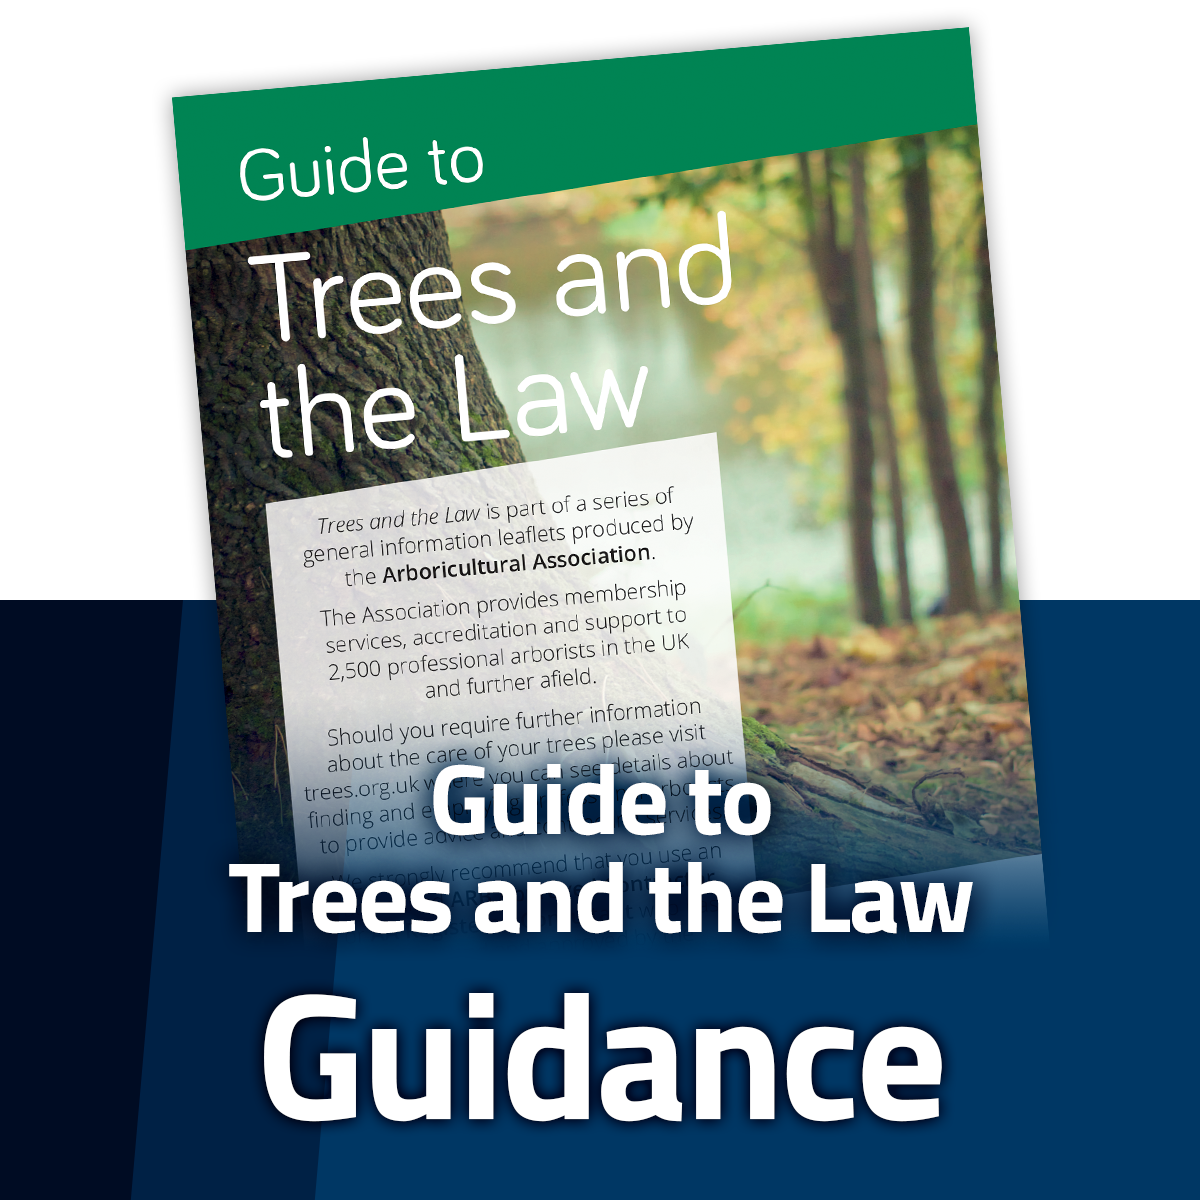 Guide to Trees and the Law